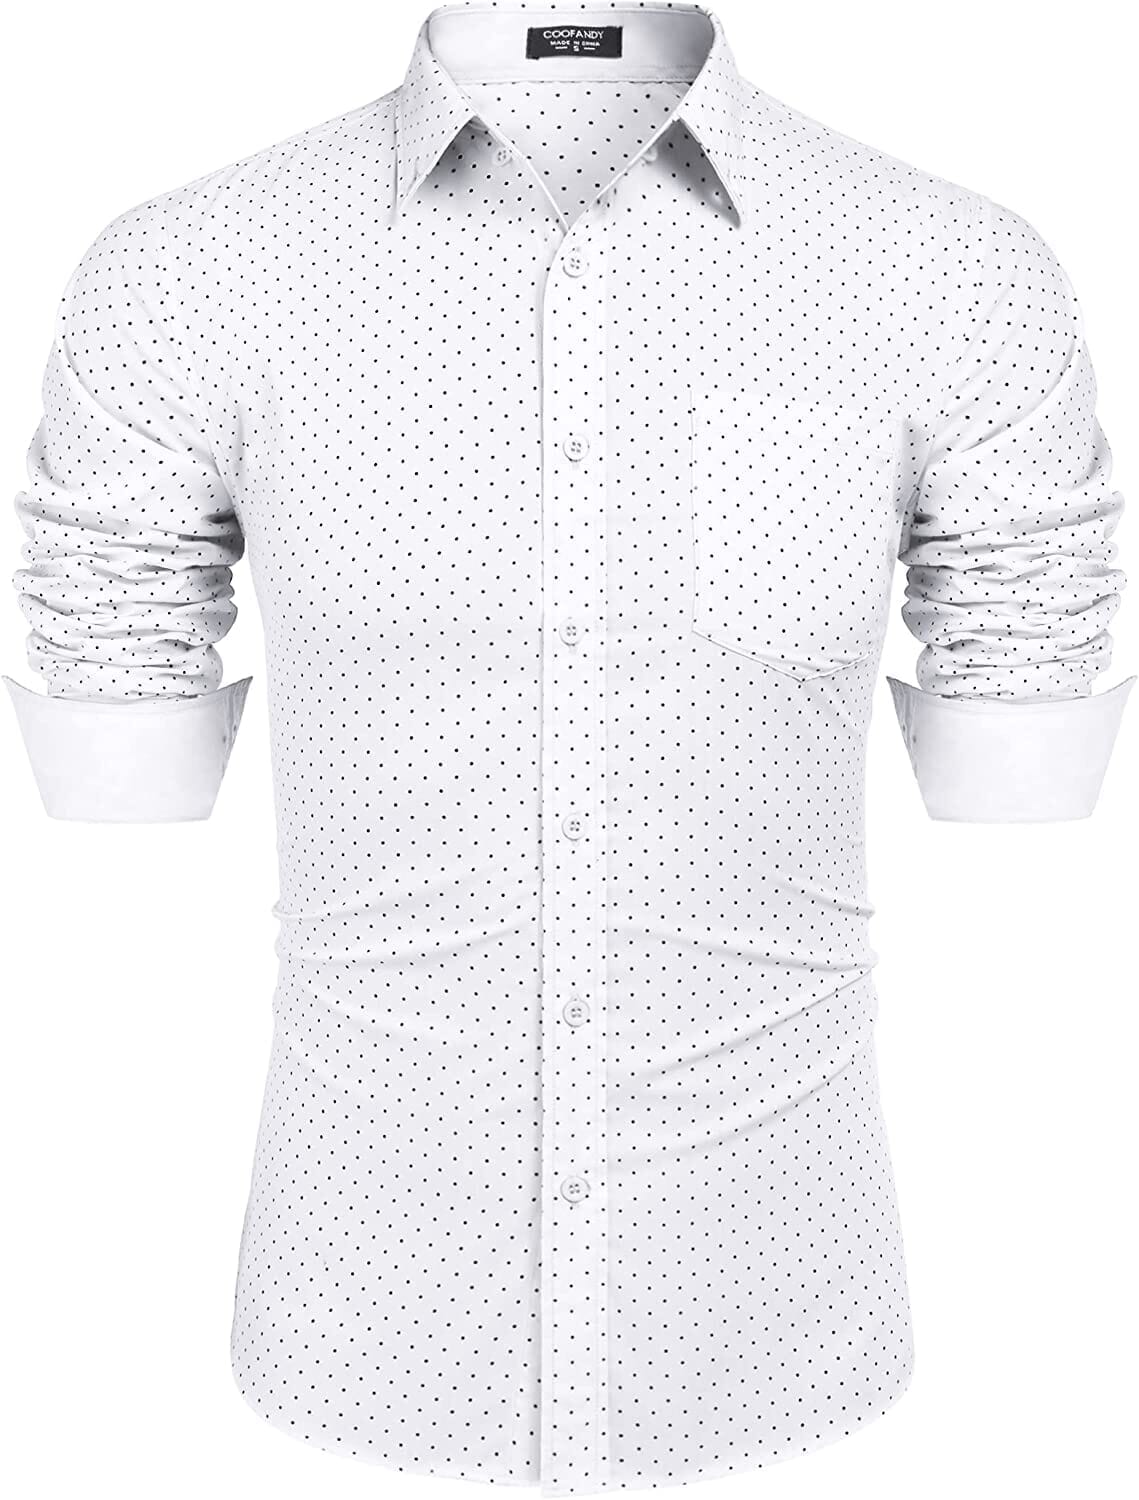 Coofandy Men's Casual Long Sleeve Shirt (US Only) Shirts Coofandy's 01-white S 